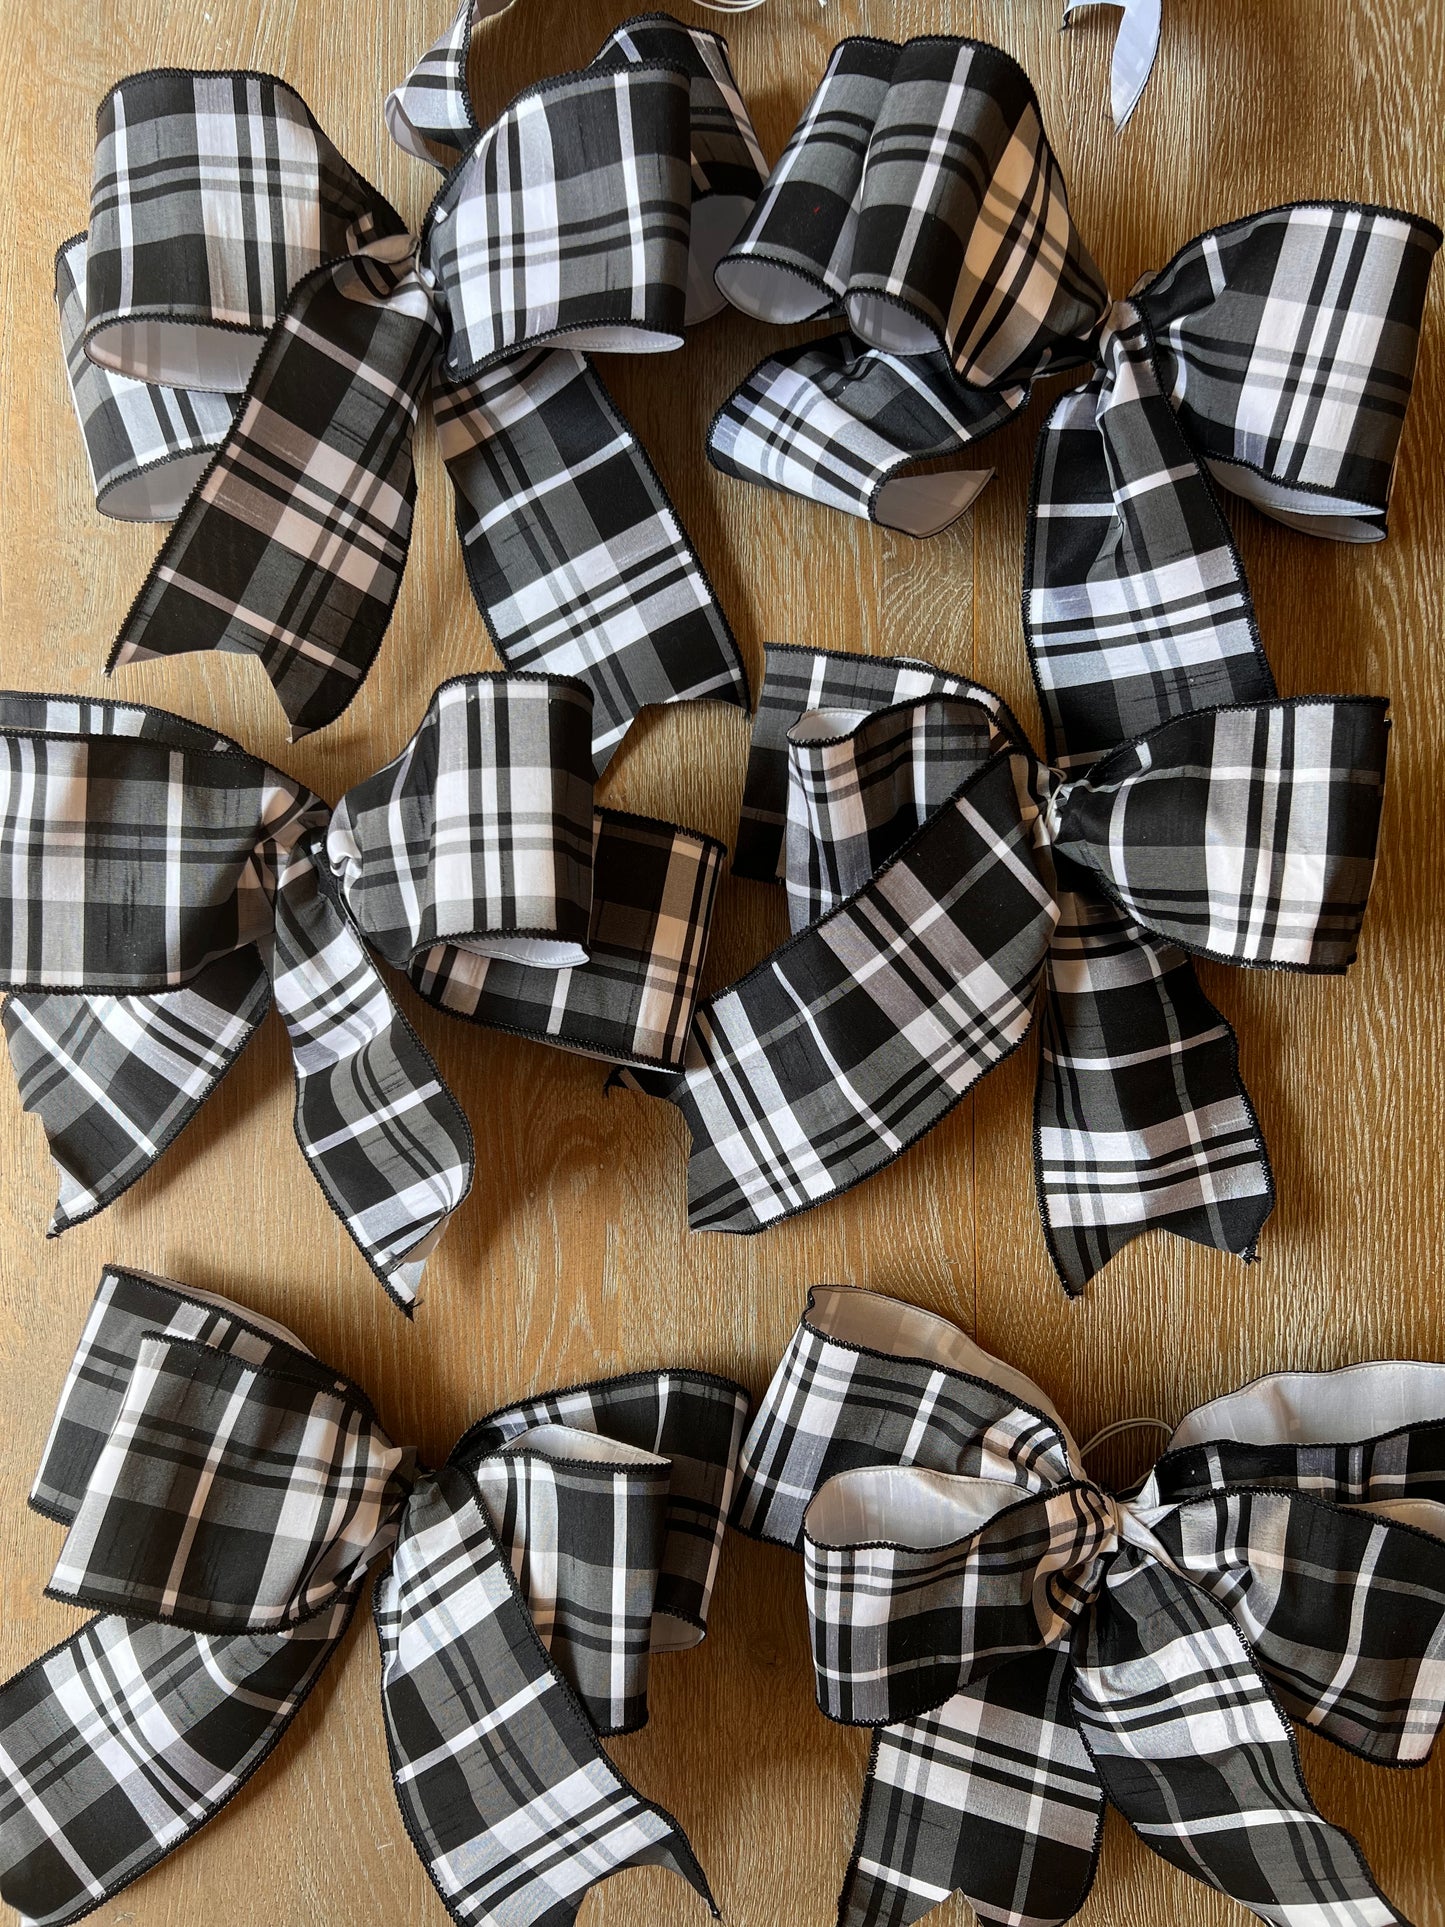 Set of 6 Handmade Double Loop Bows in Black and White Plaid